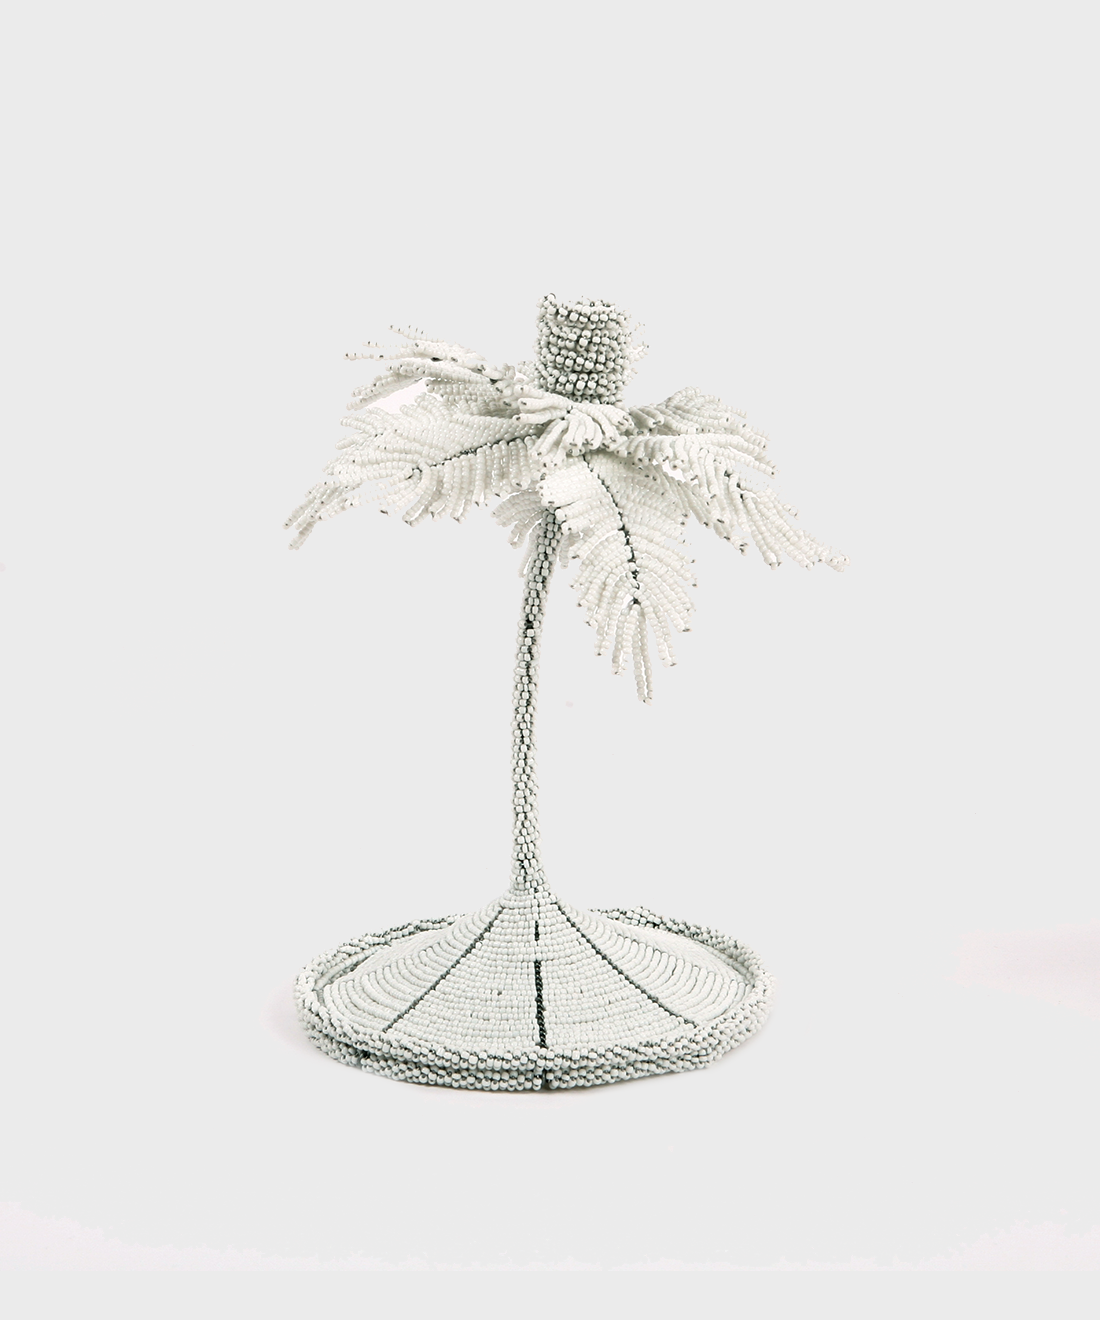 Beaded Palm Candlesticks in White